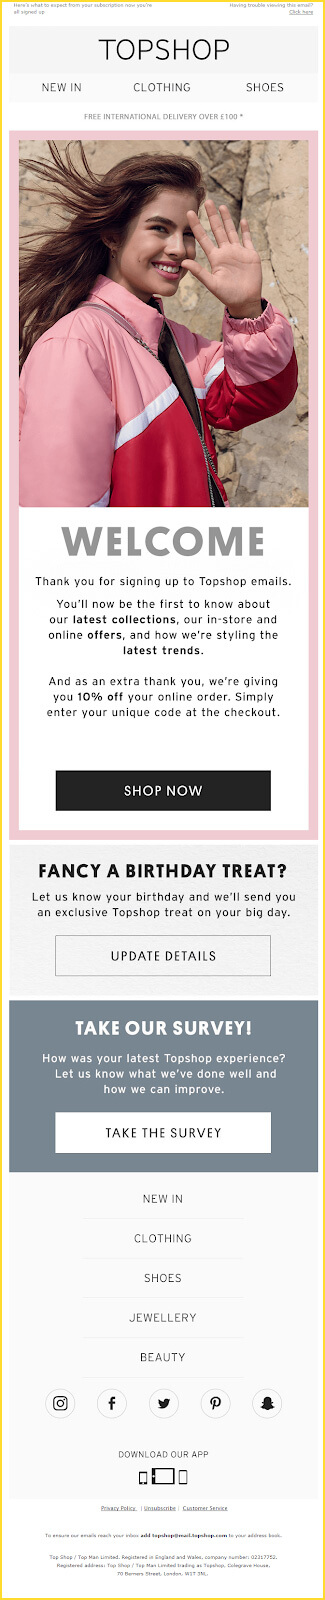 topshop email example 1